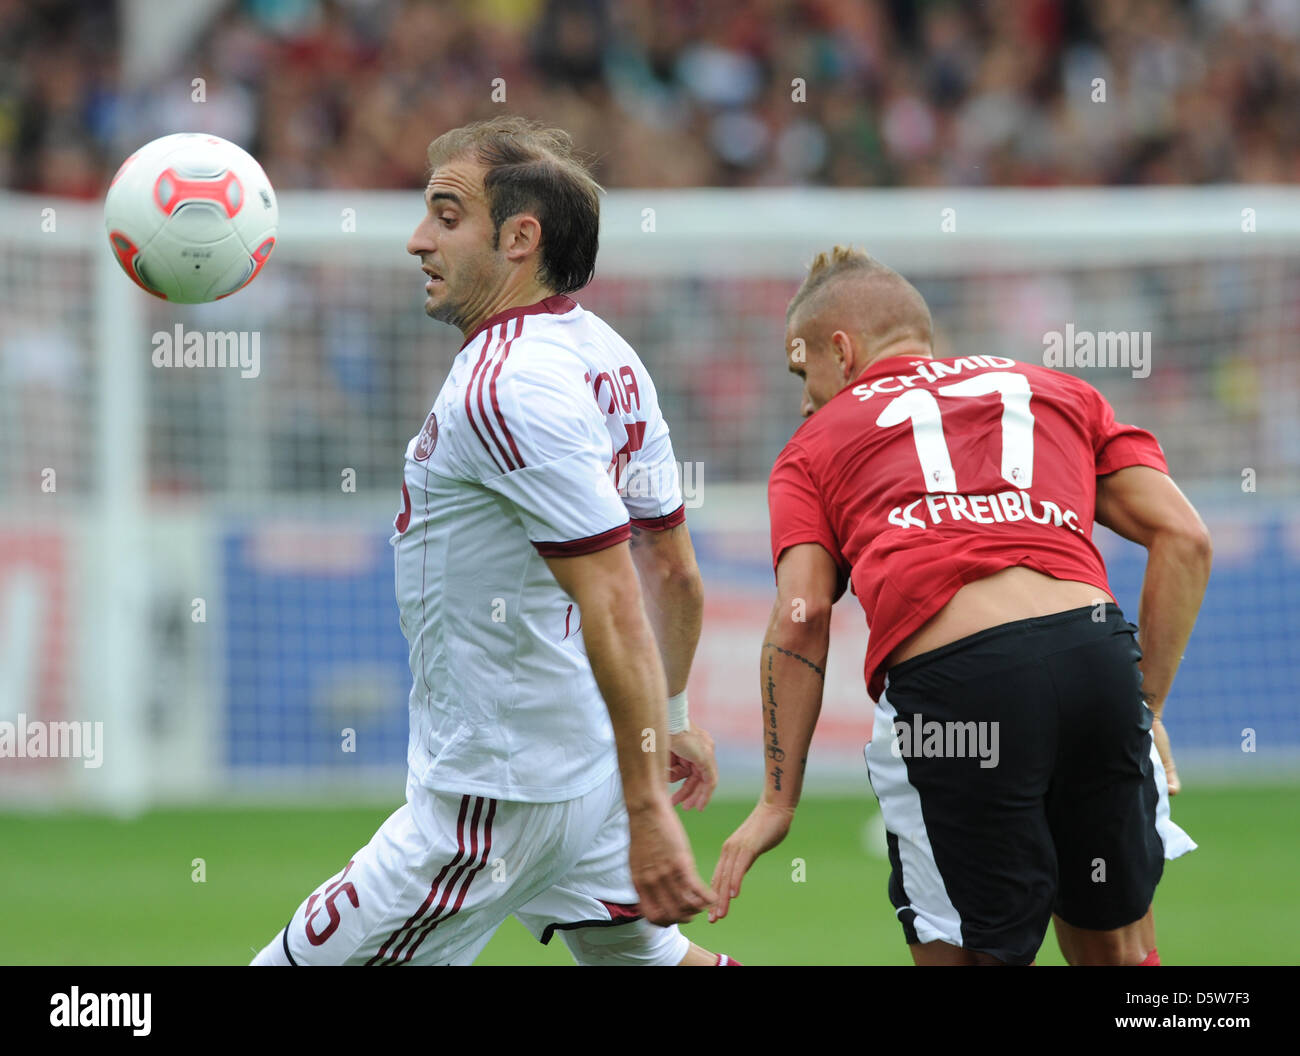 Freiburg's Jonathan Schmid (R) vies for the ball with Nuremberg's Javier Pinola during the German Bundesliga match between SC Freiburg and FC Nuremberg at Mage Solar Stadium in Freiburg, Germany, 06 October 2012. Photo: ULI DECK (ATTENTION: EMBARGO CONDITIONS! The DFL permits the further utilisation of up to 15 pictures only (no sequntial pictures or video-similar series of picture Stock Photo